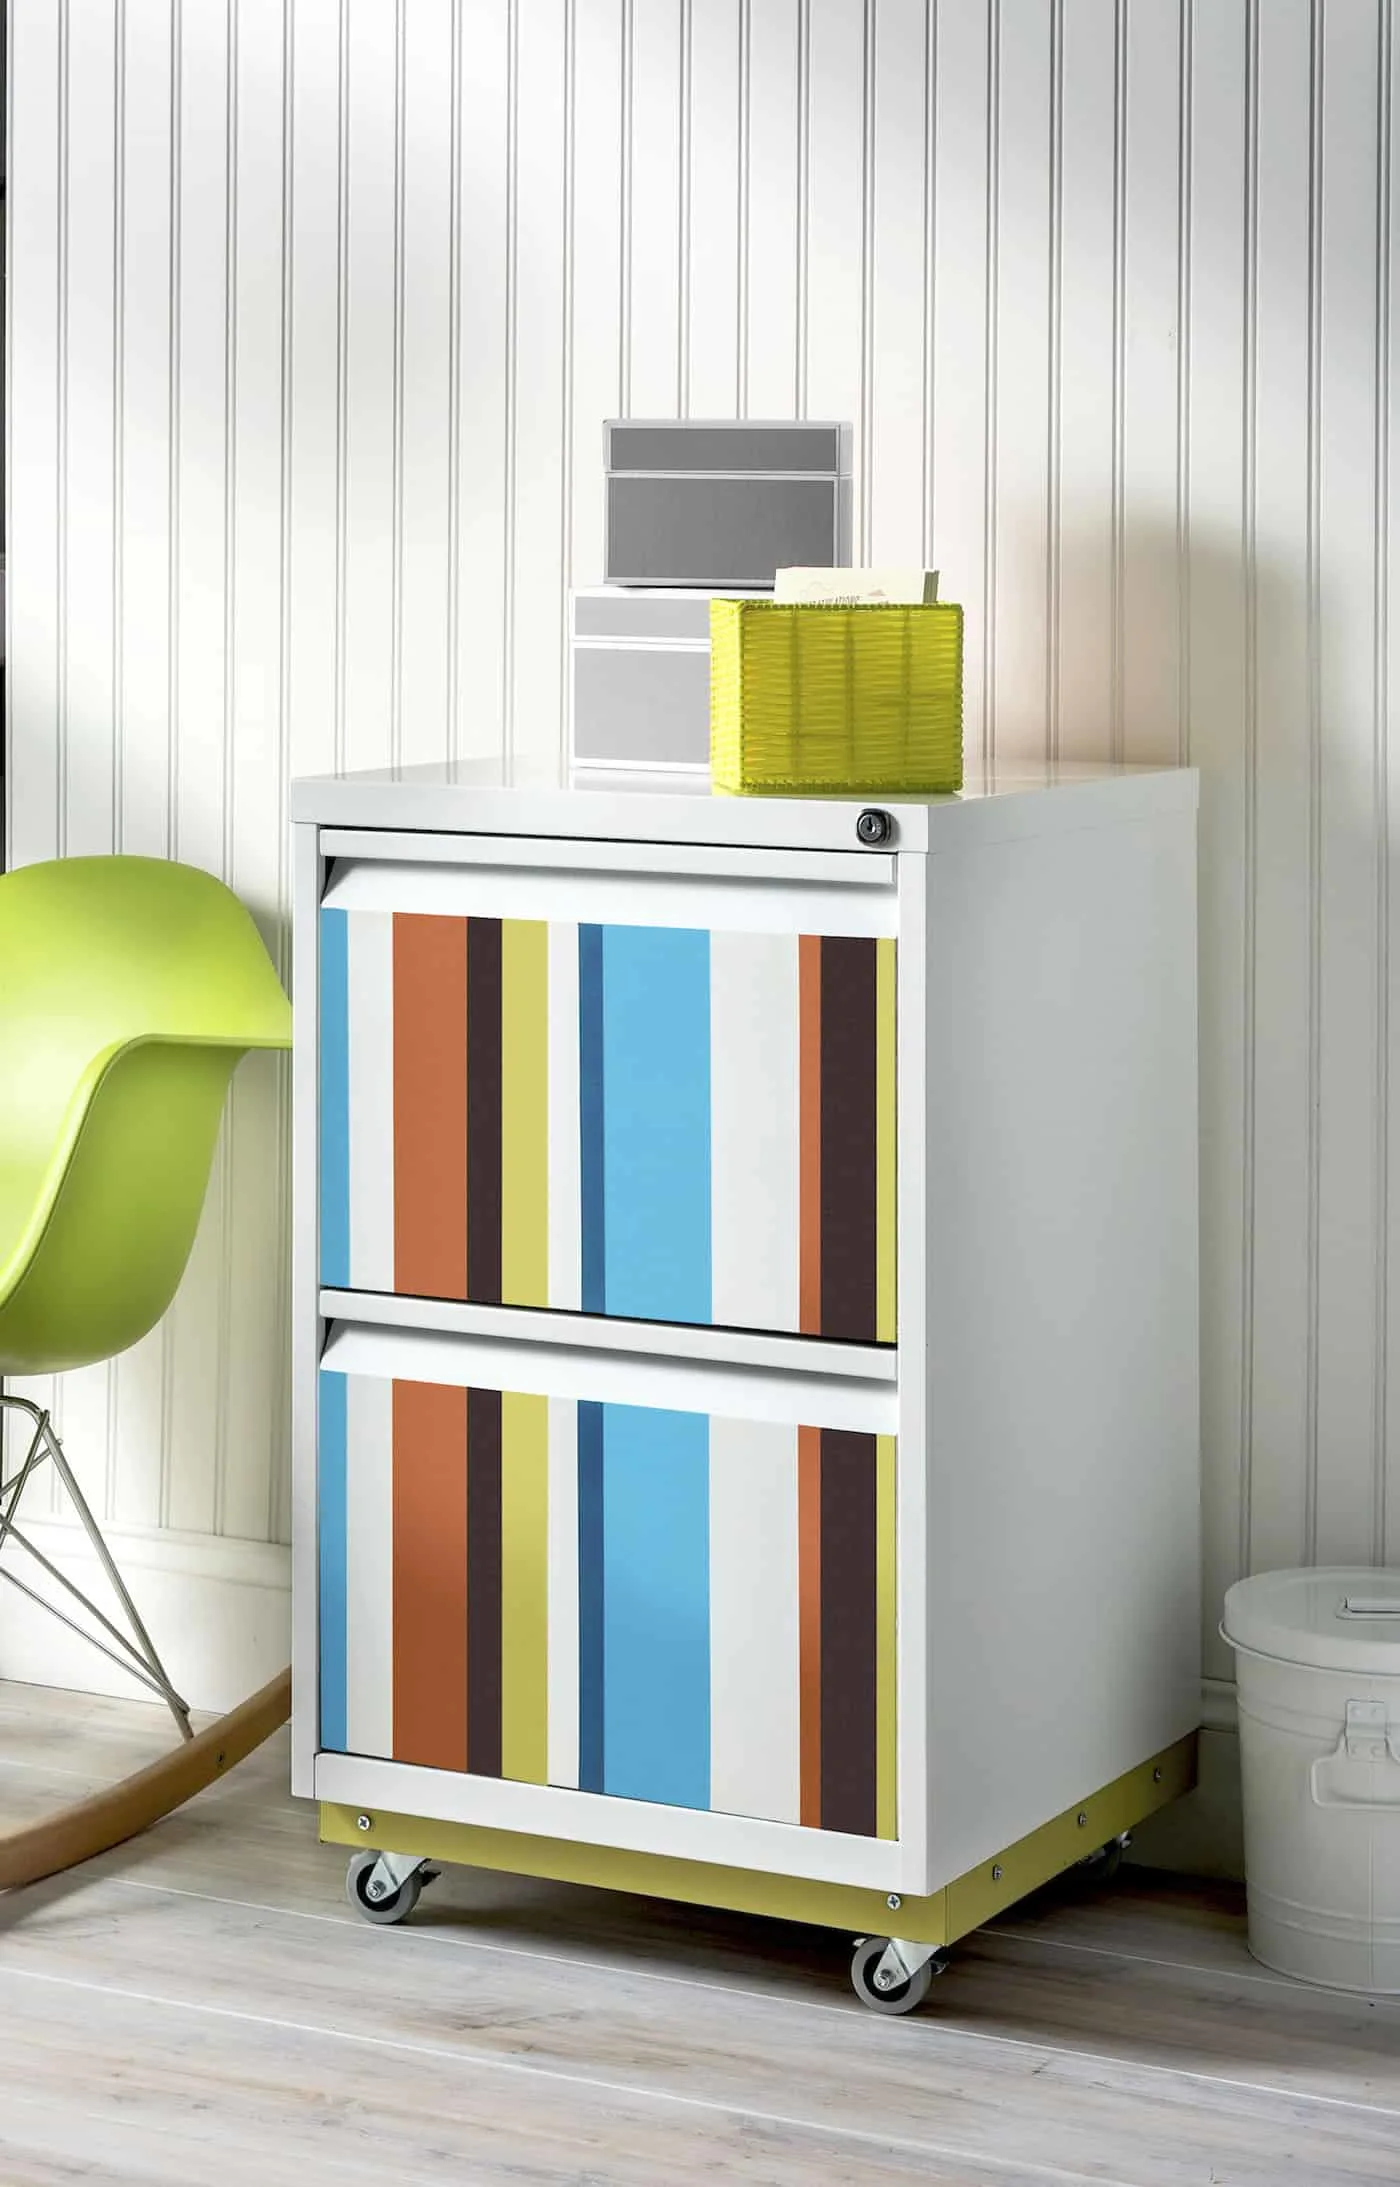 In this easy DIY file cabinet revamp, we took a thrift store find and made it over with existing spray paint. The whole project cost less than $10! If you want to add wheels - I'll show you how to do that too. Click through to see!